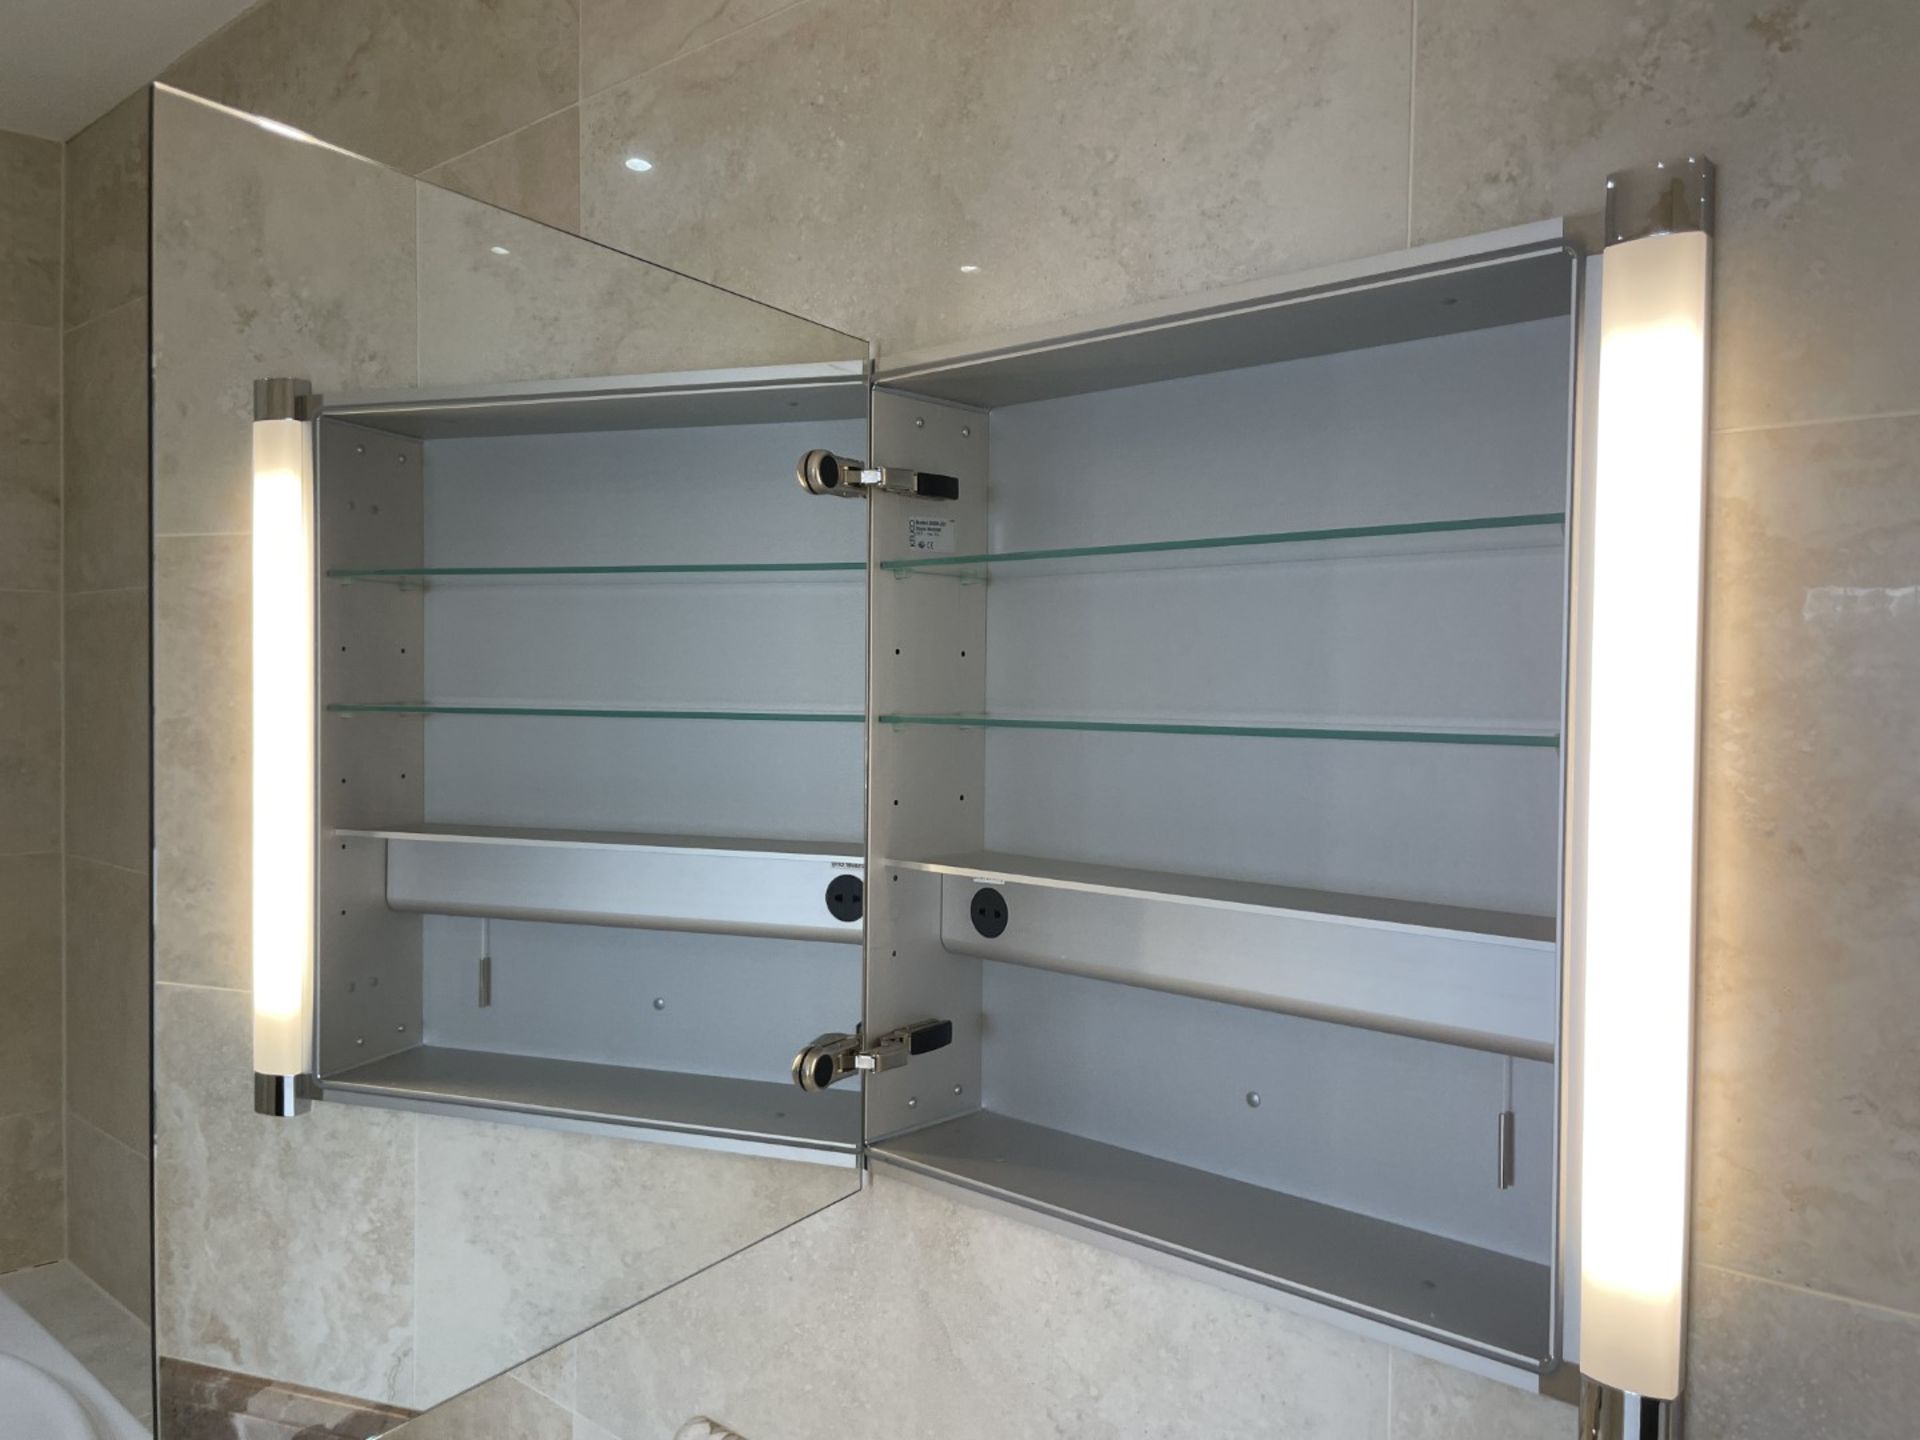 2 x KEUCO Illuminated Mirrored Wall Mounted Cabinets - Total Original Value: £2,000 - Ref: - Image 8 of 19